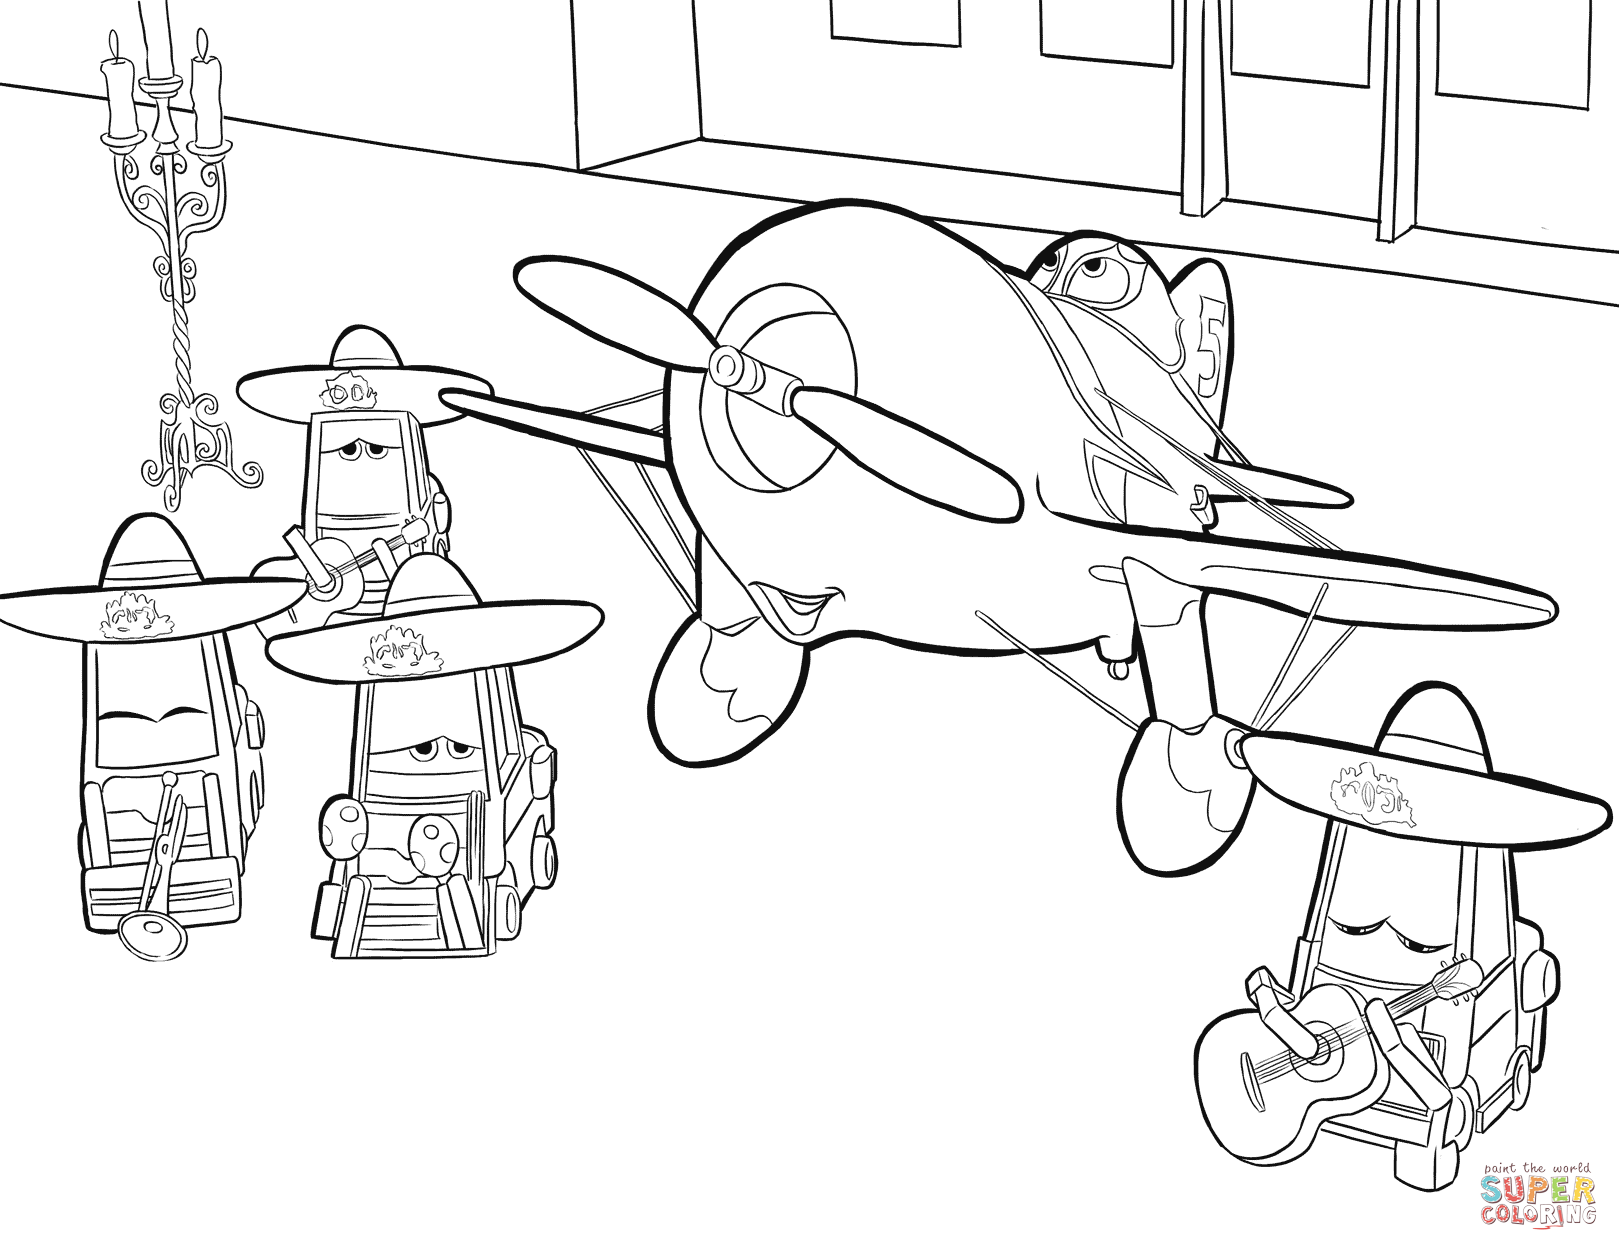 Disney Planes coloring pages | Free Coloring Pages